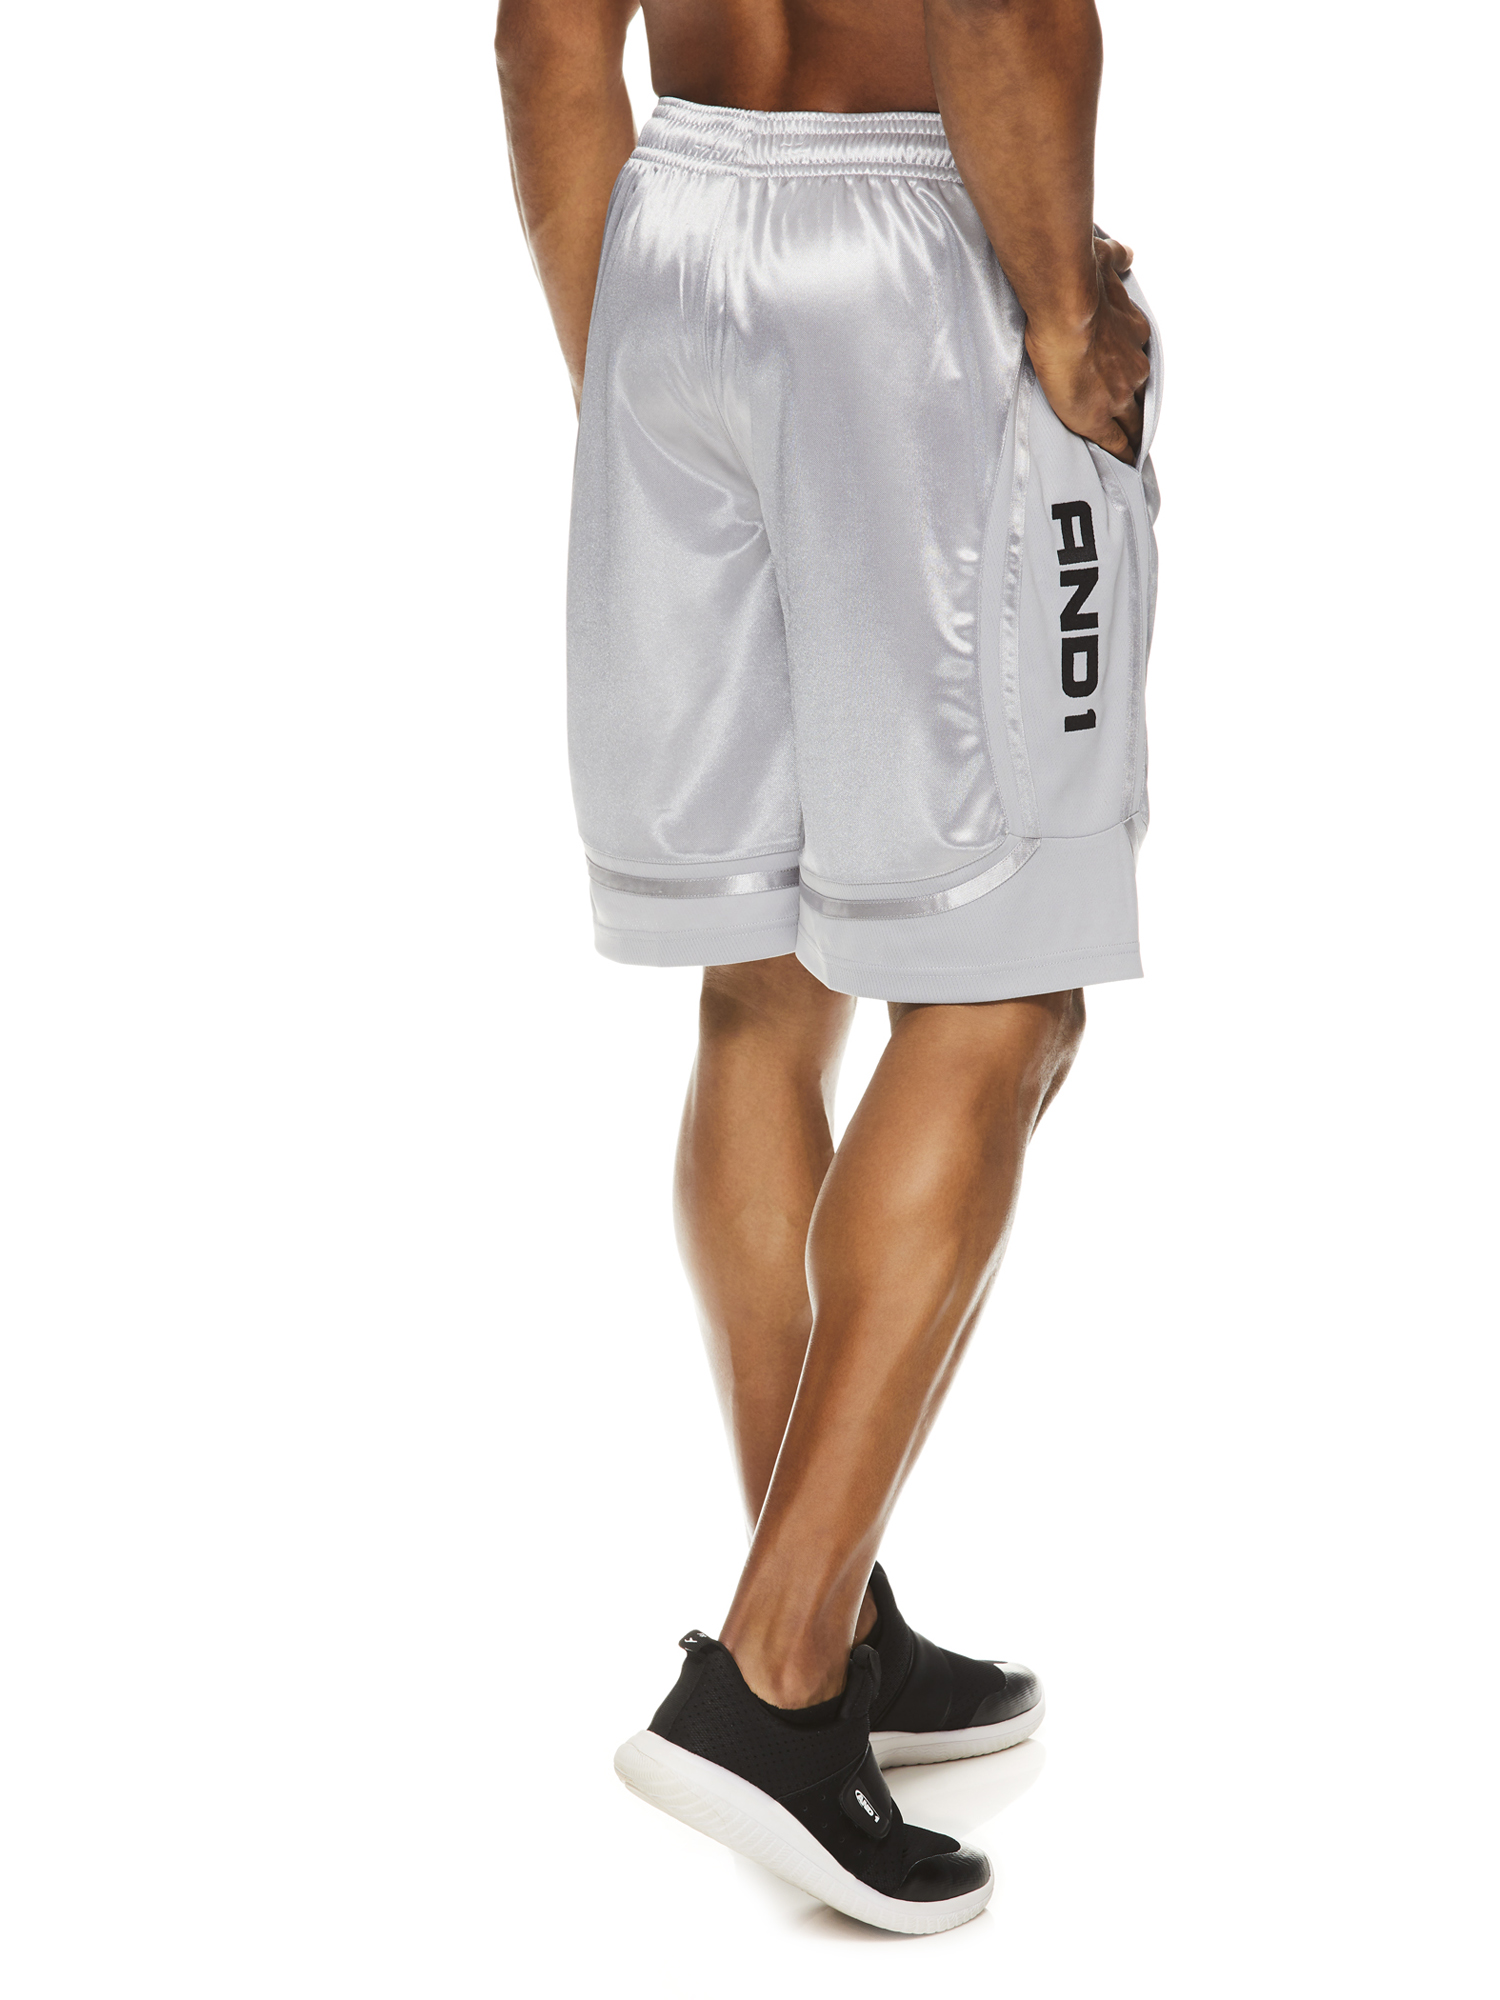 AND1 Men's and Big Men's Active Core 11" Home Court Basketball Shorts, Sizes S-5XL - image 4 of 4